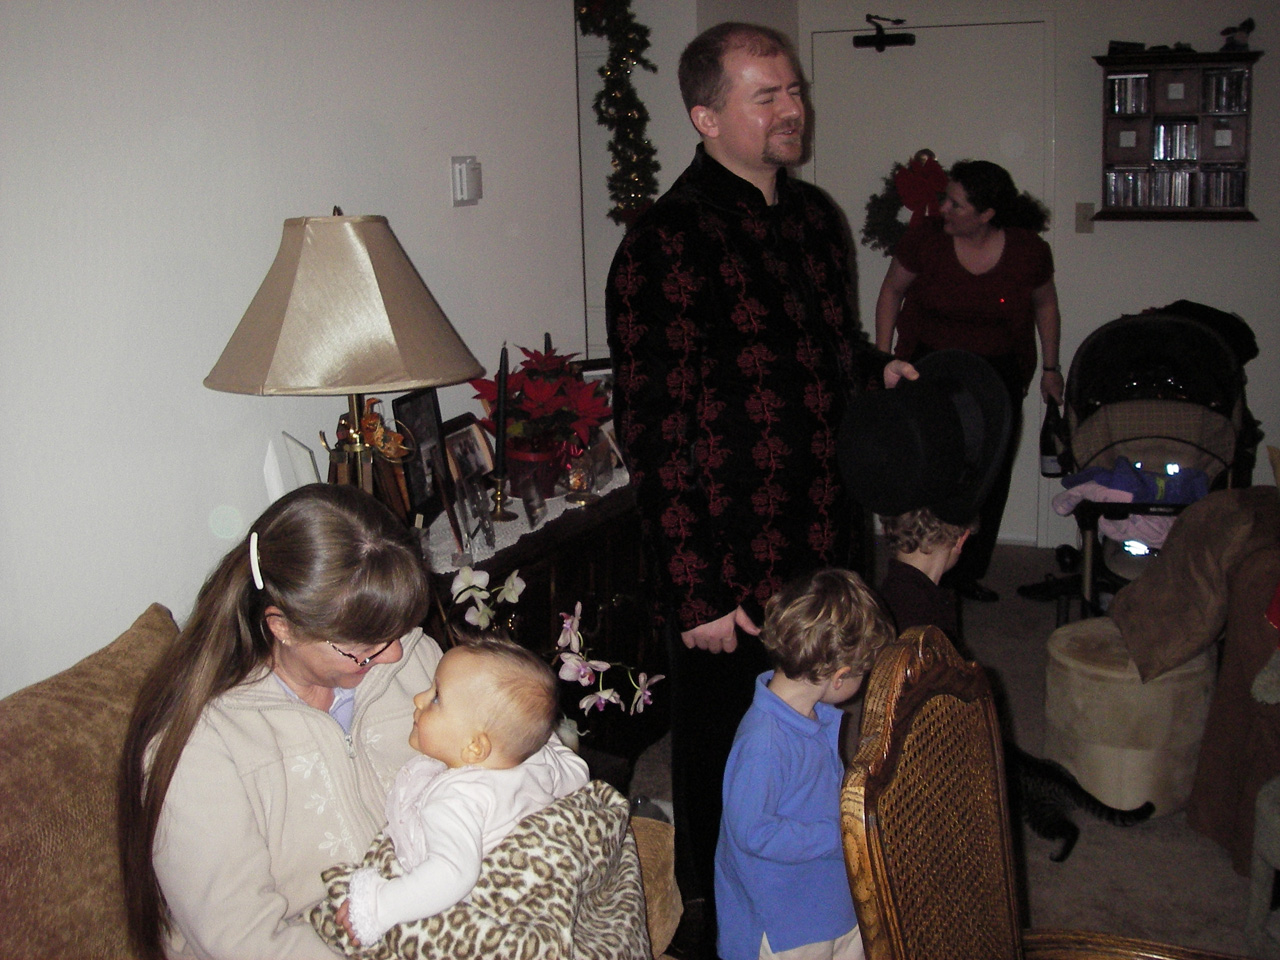 Adele holding Sophia, Steve, James and John, and Jackie at a friend's house for Christmas Eve Dinner